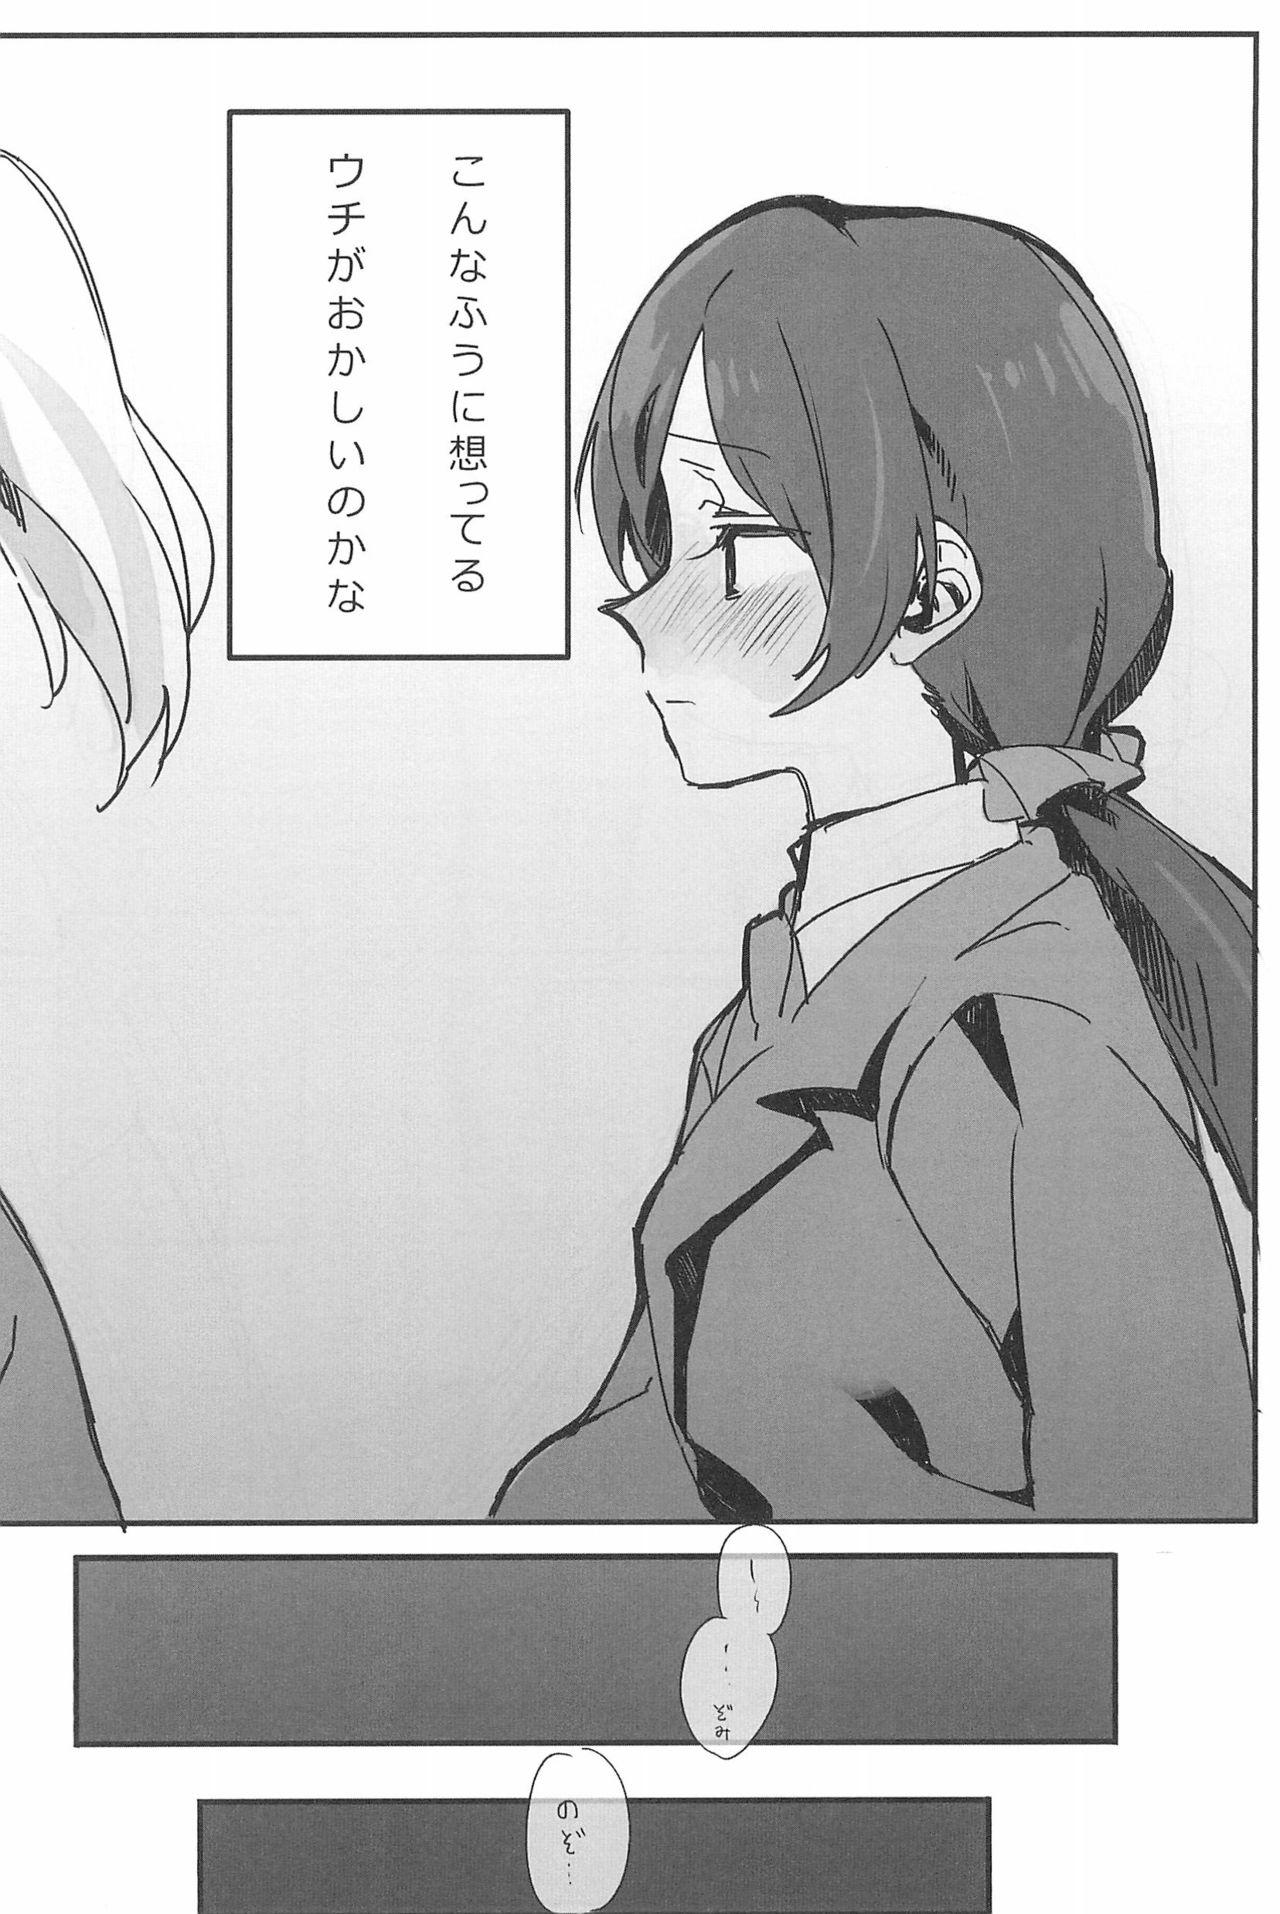 Negra synergy - Love live Licking - Page 10